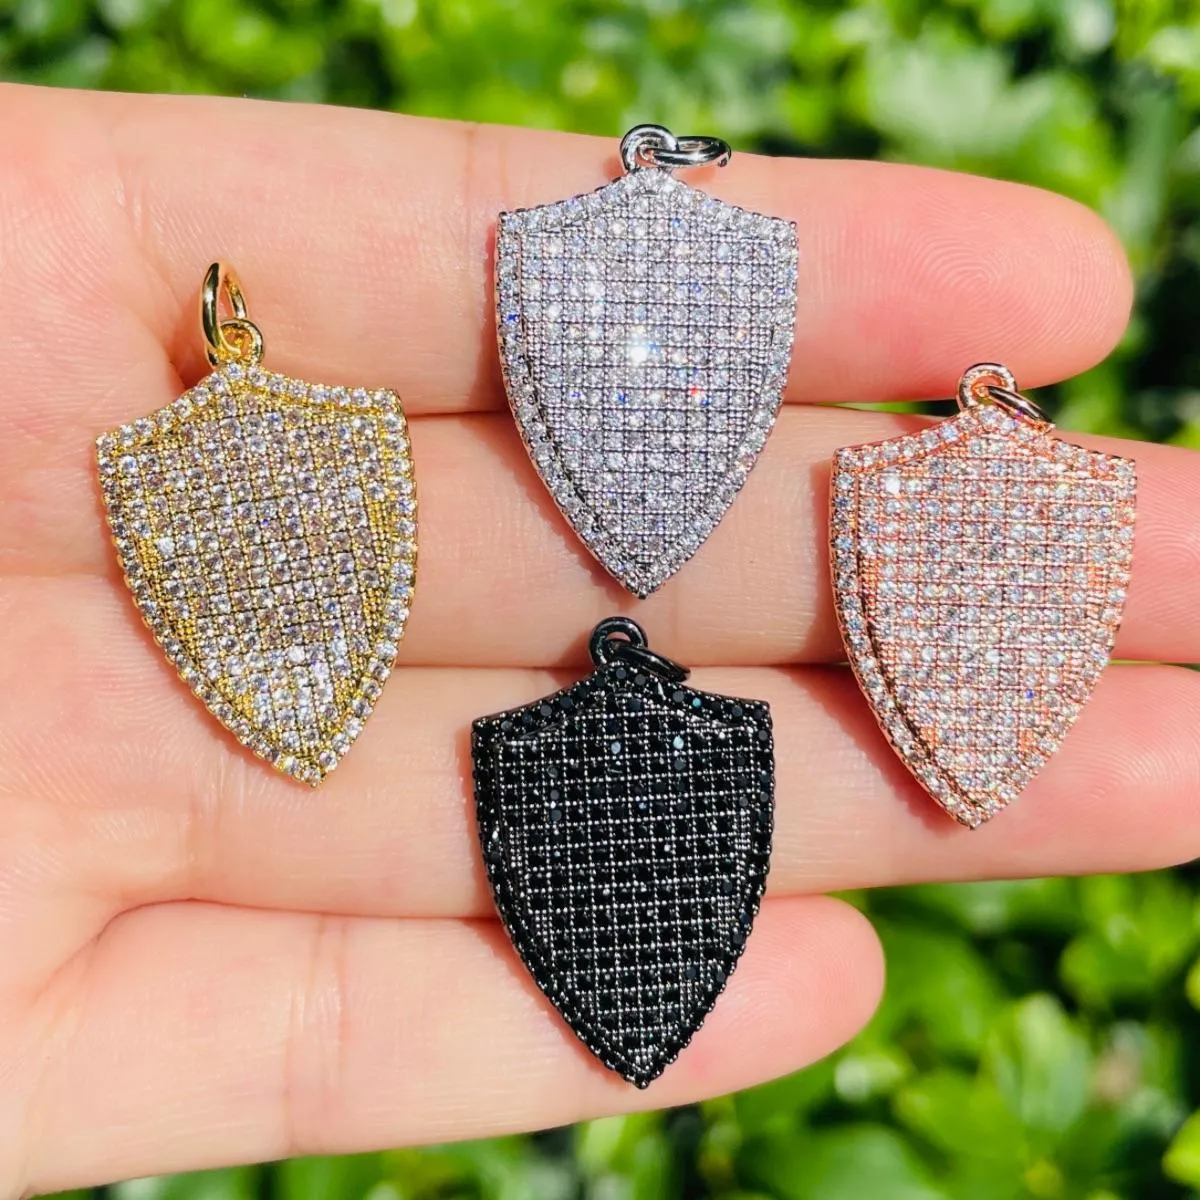 Andra 5st Zirconia Micro Pave Shield Pendants for Women Necklace Armband Making Gold Plated Charms för smyckesfynd Partihandel